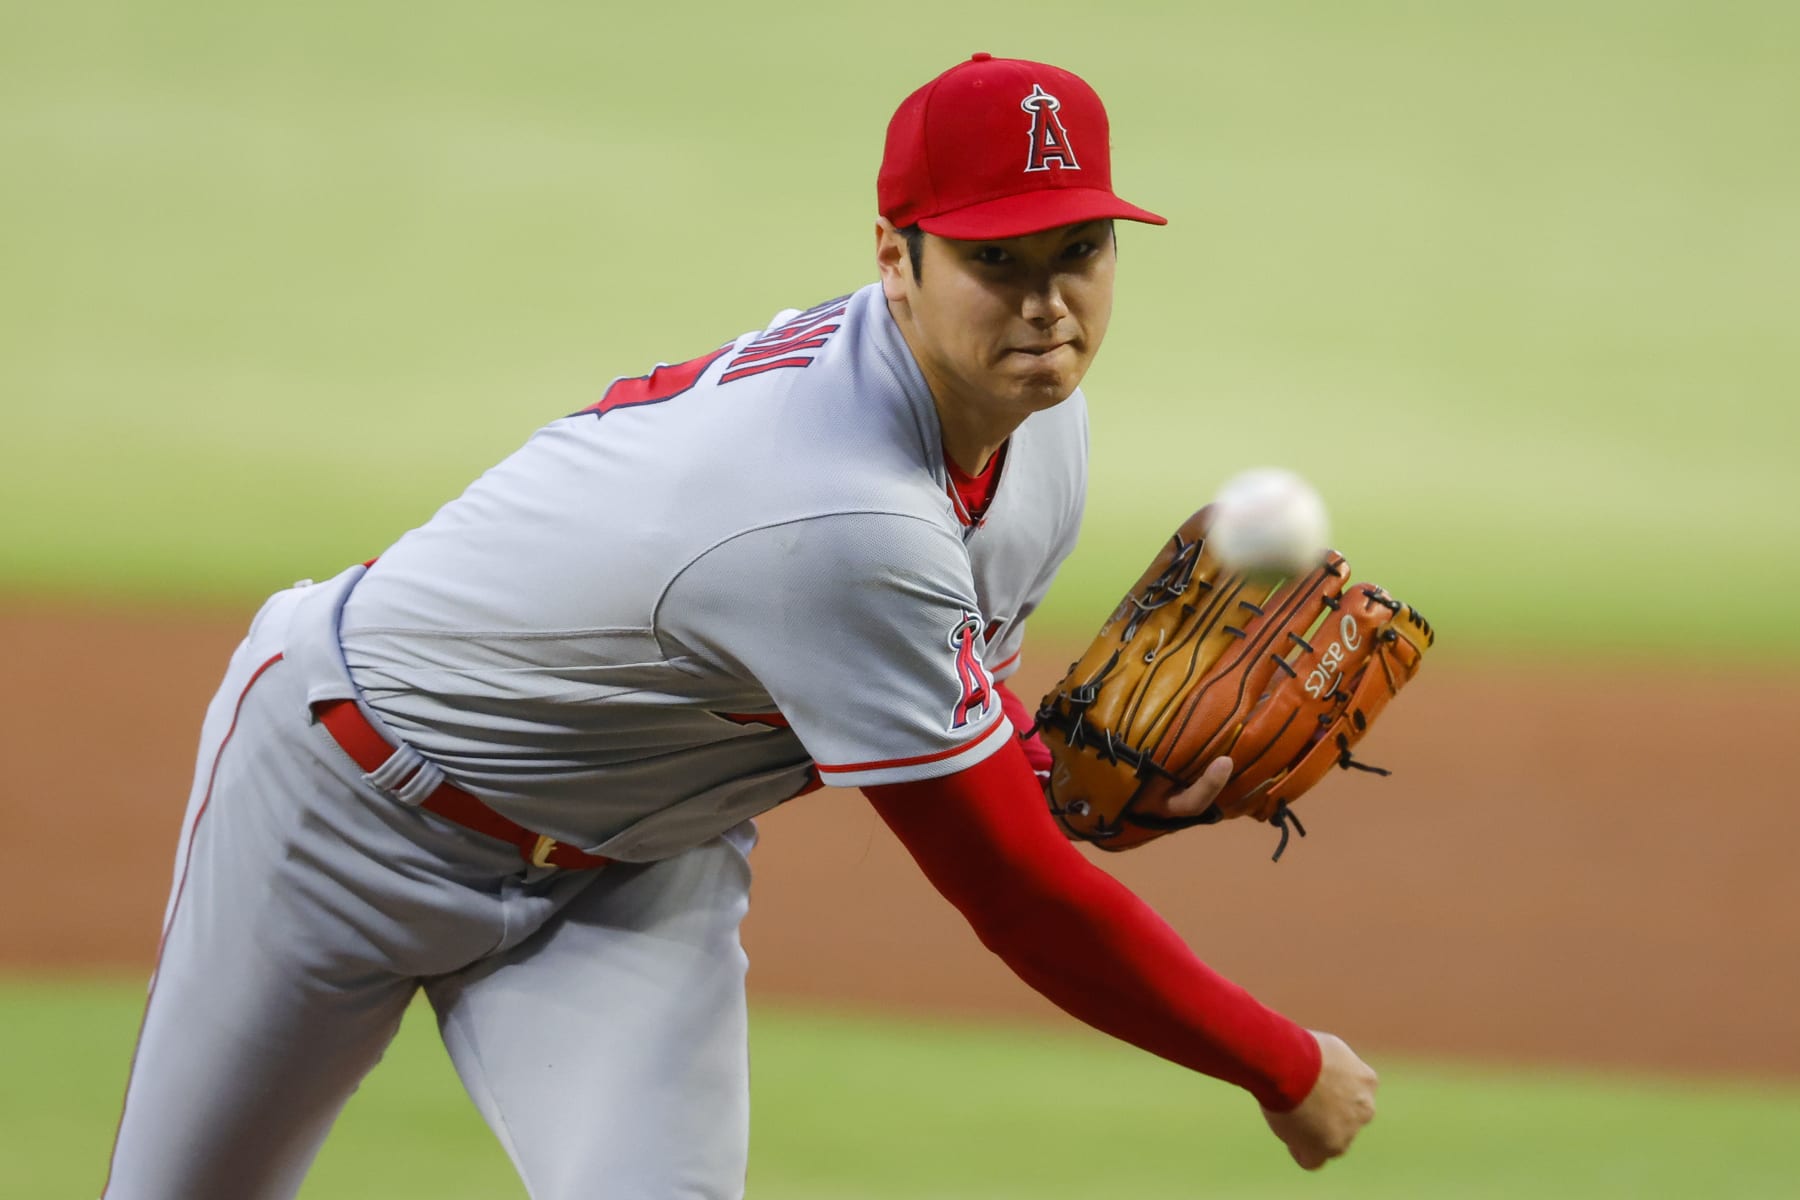 Los Angeles Angels star Shohei Ohtani on cover of MLB the Show 22 - ESPN